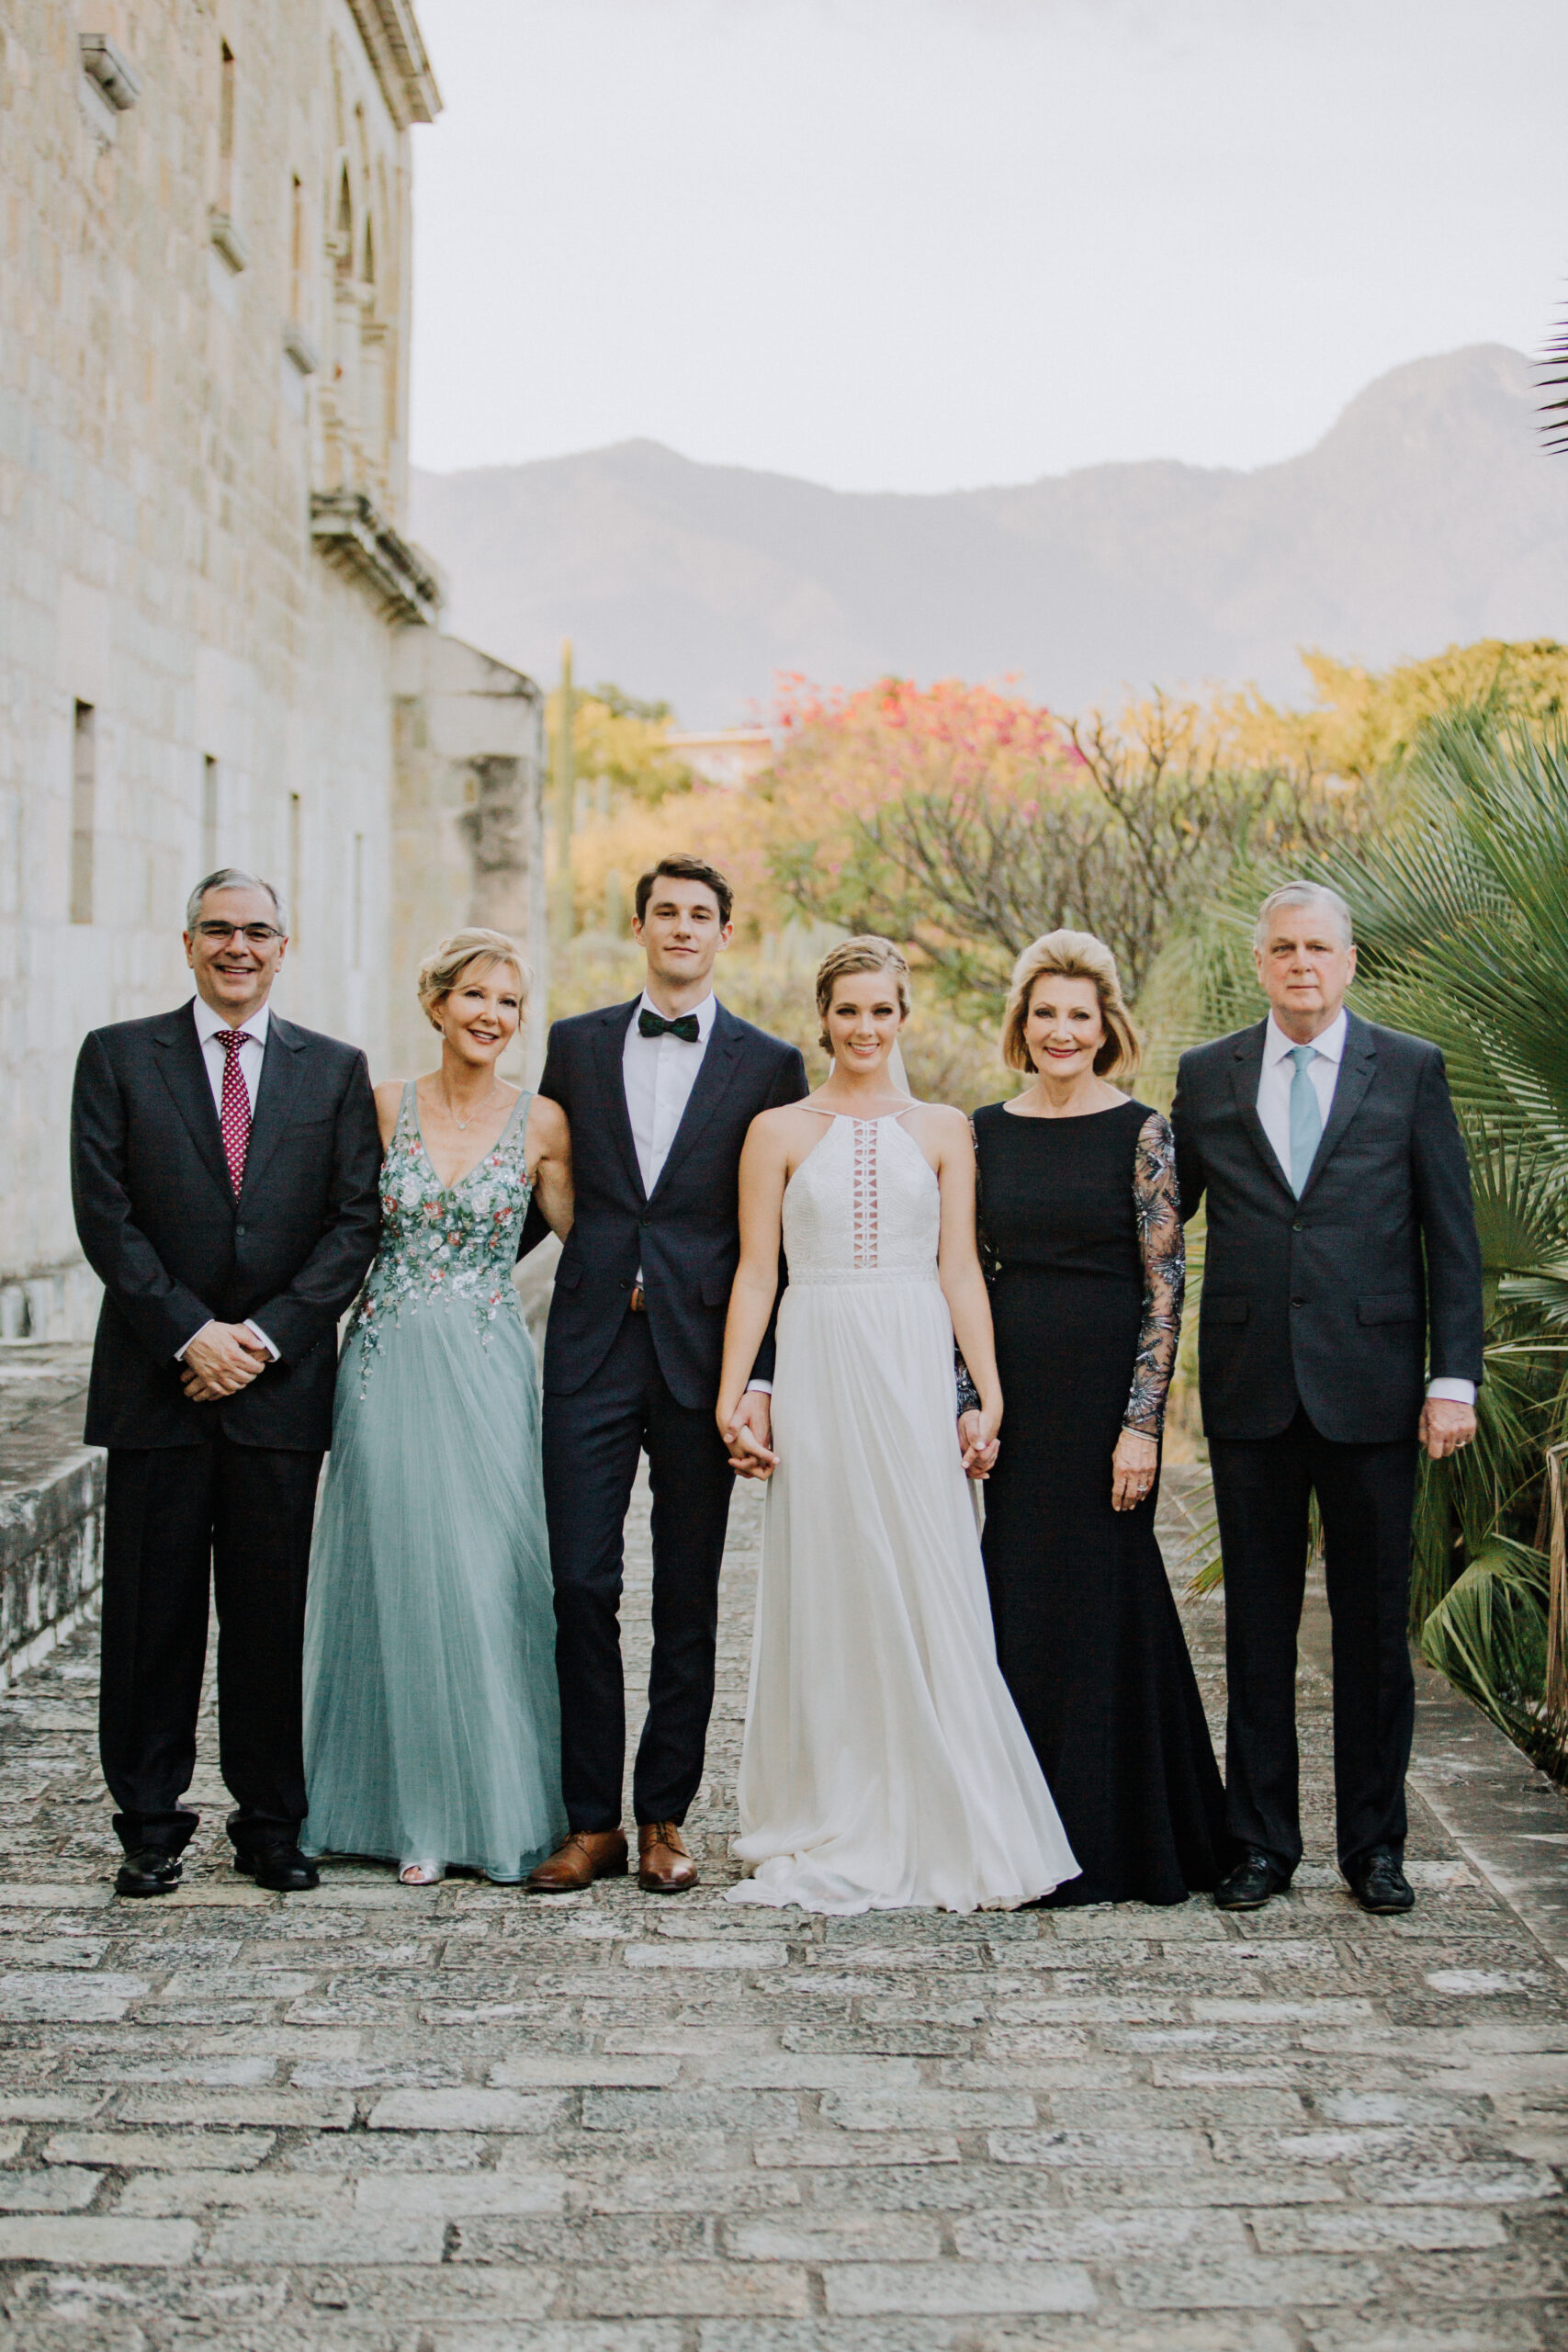 Bride and grooms family stands outside the stunning church wedding venue 